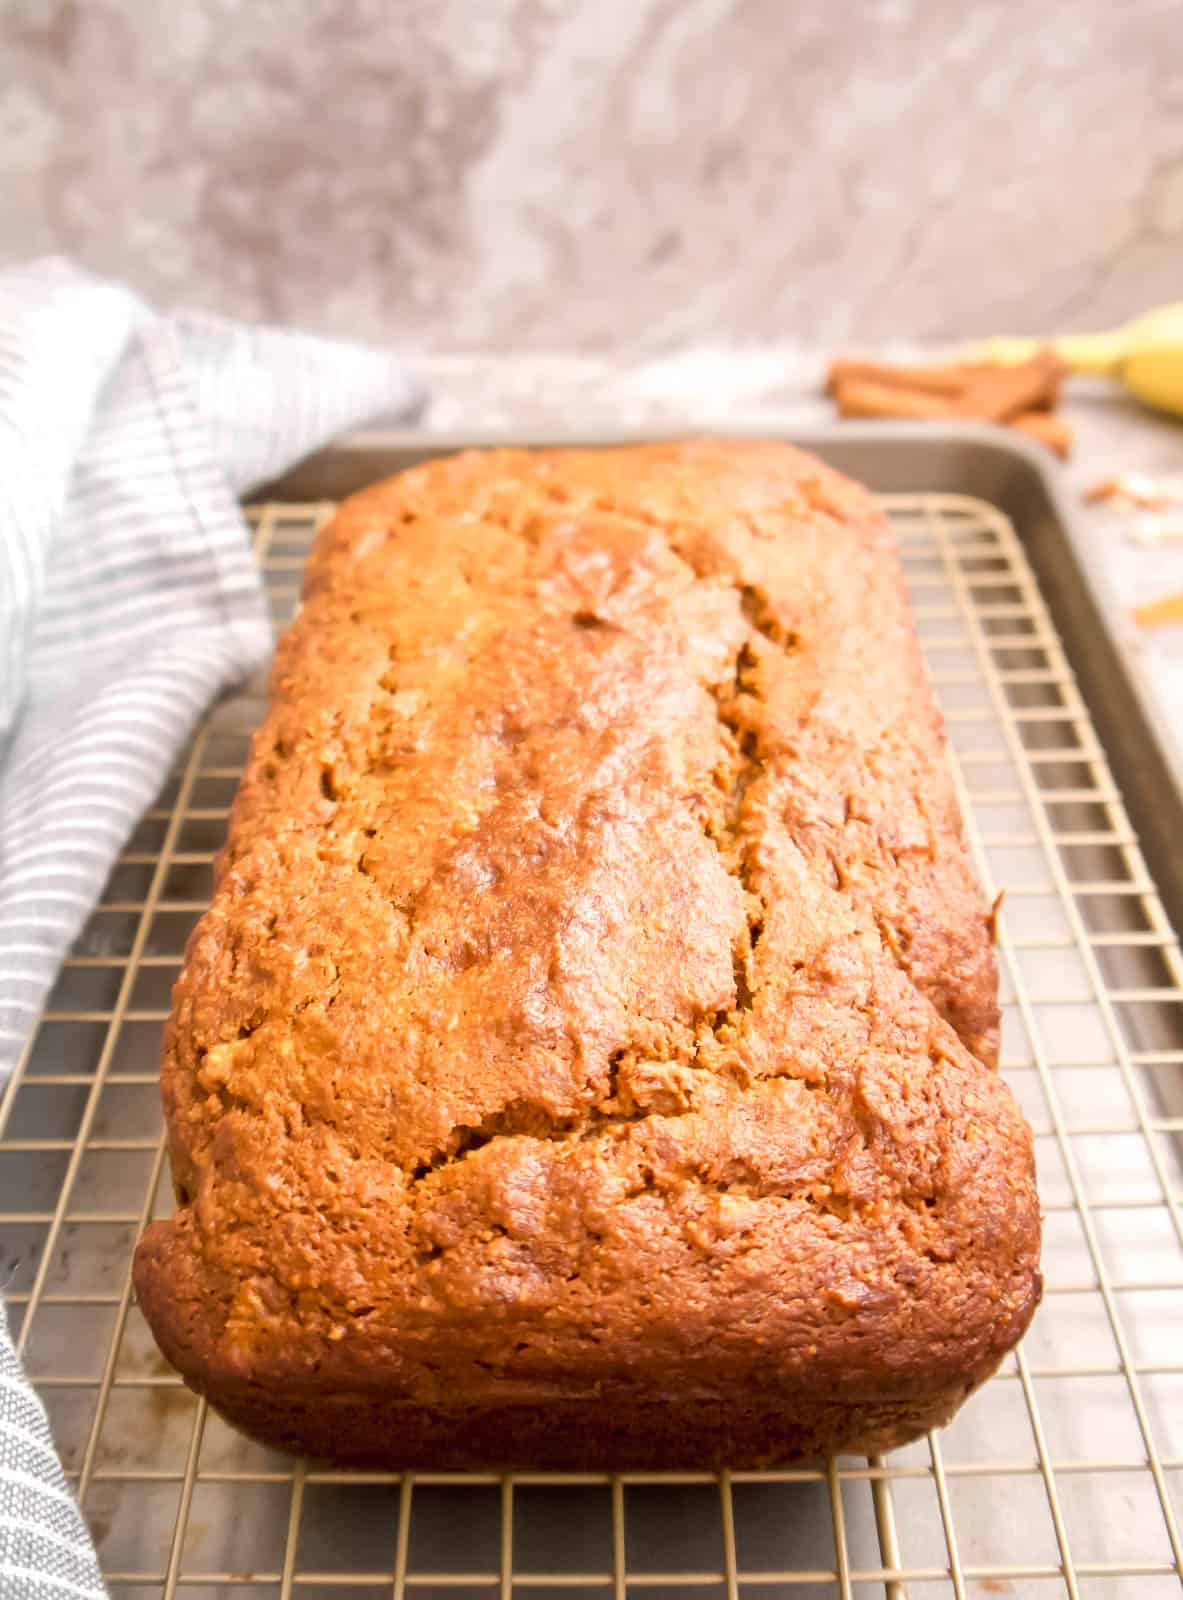 Paleo Carrot Cake Banana Bread freshly baked and out of the oven.